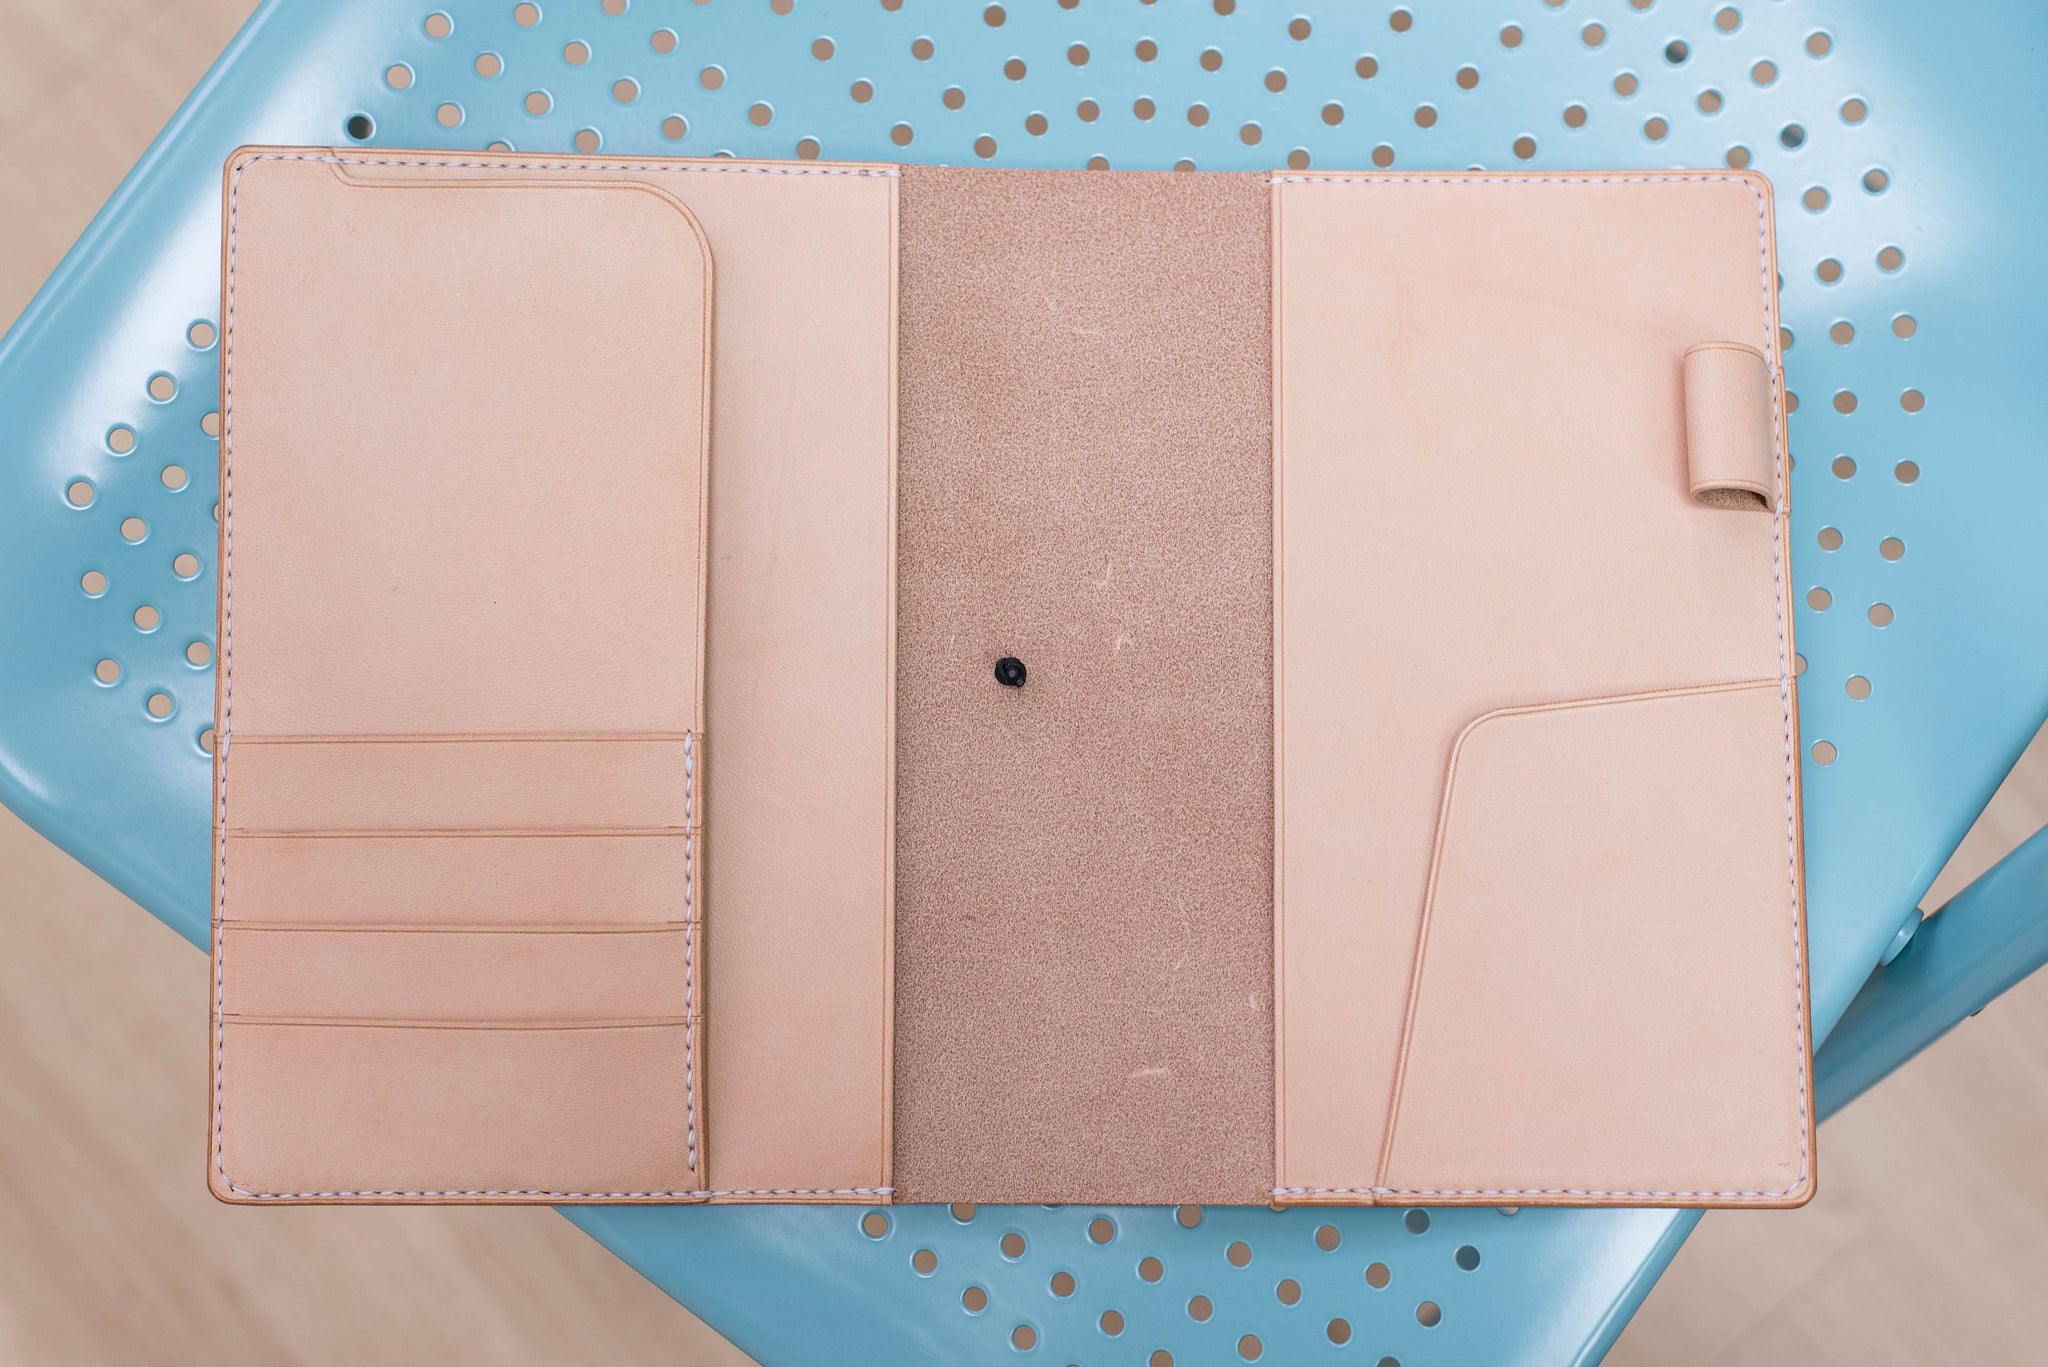 A5/Hobonichi Cousin/Seven Seas Elastic Closure Leather Notebook Cover with Card pockets